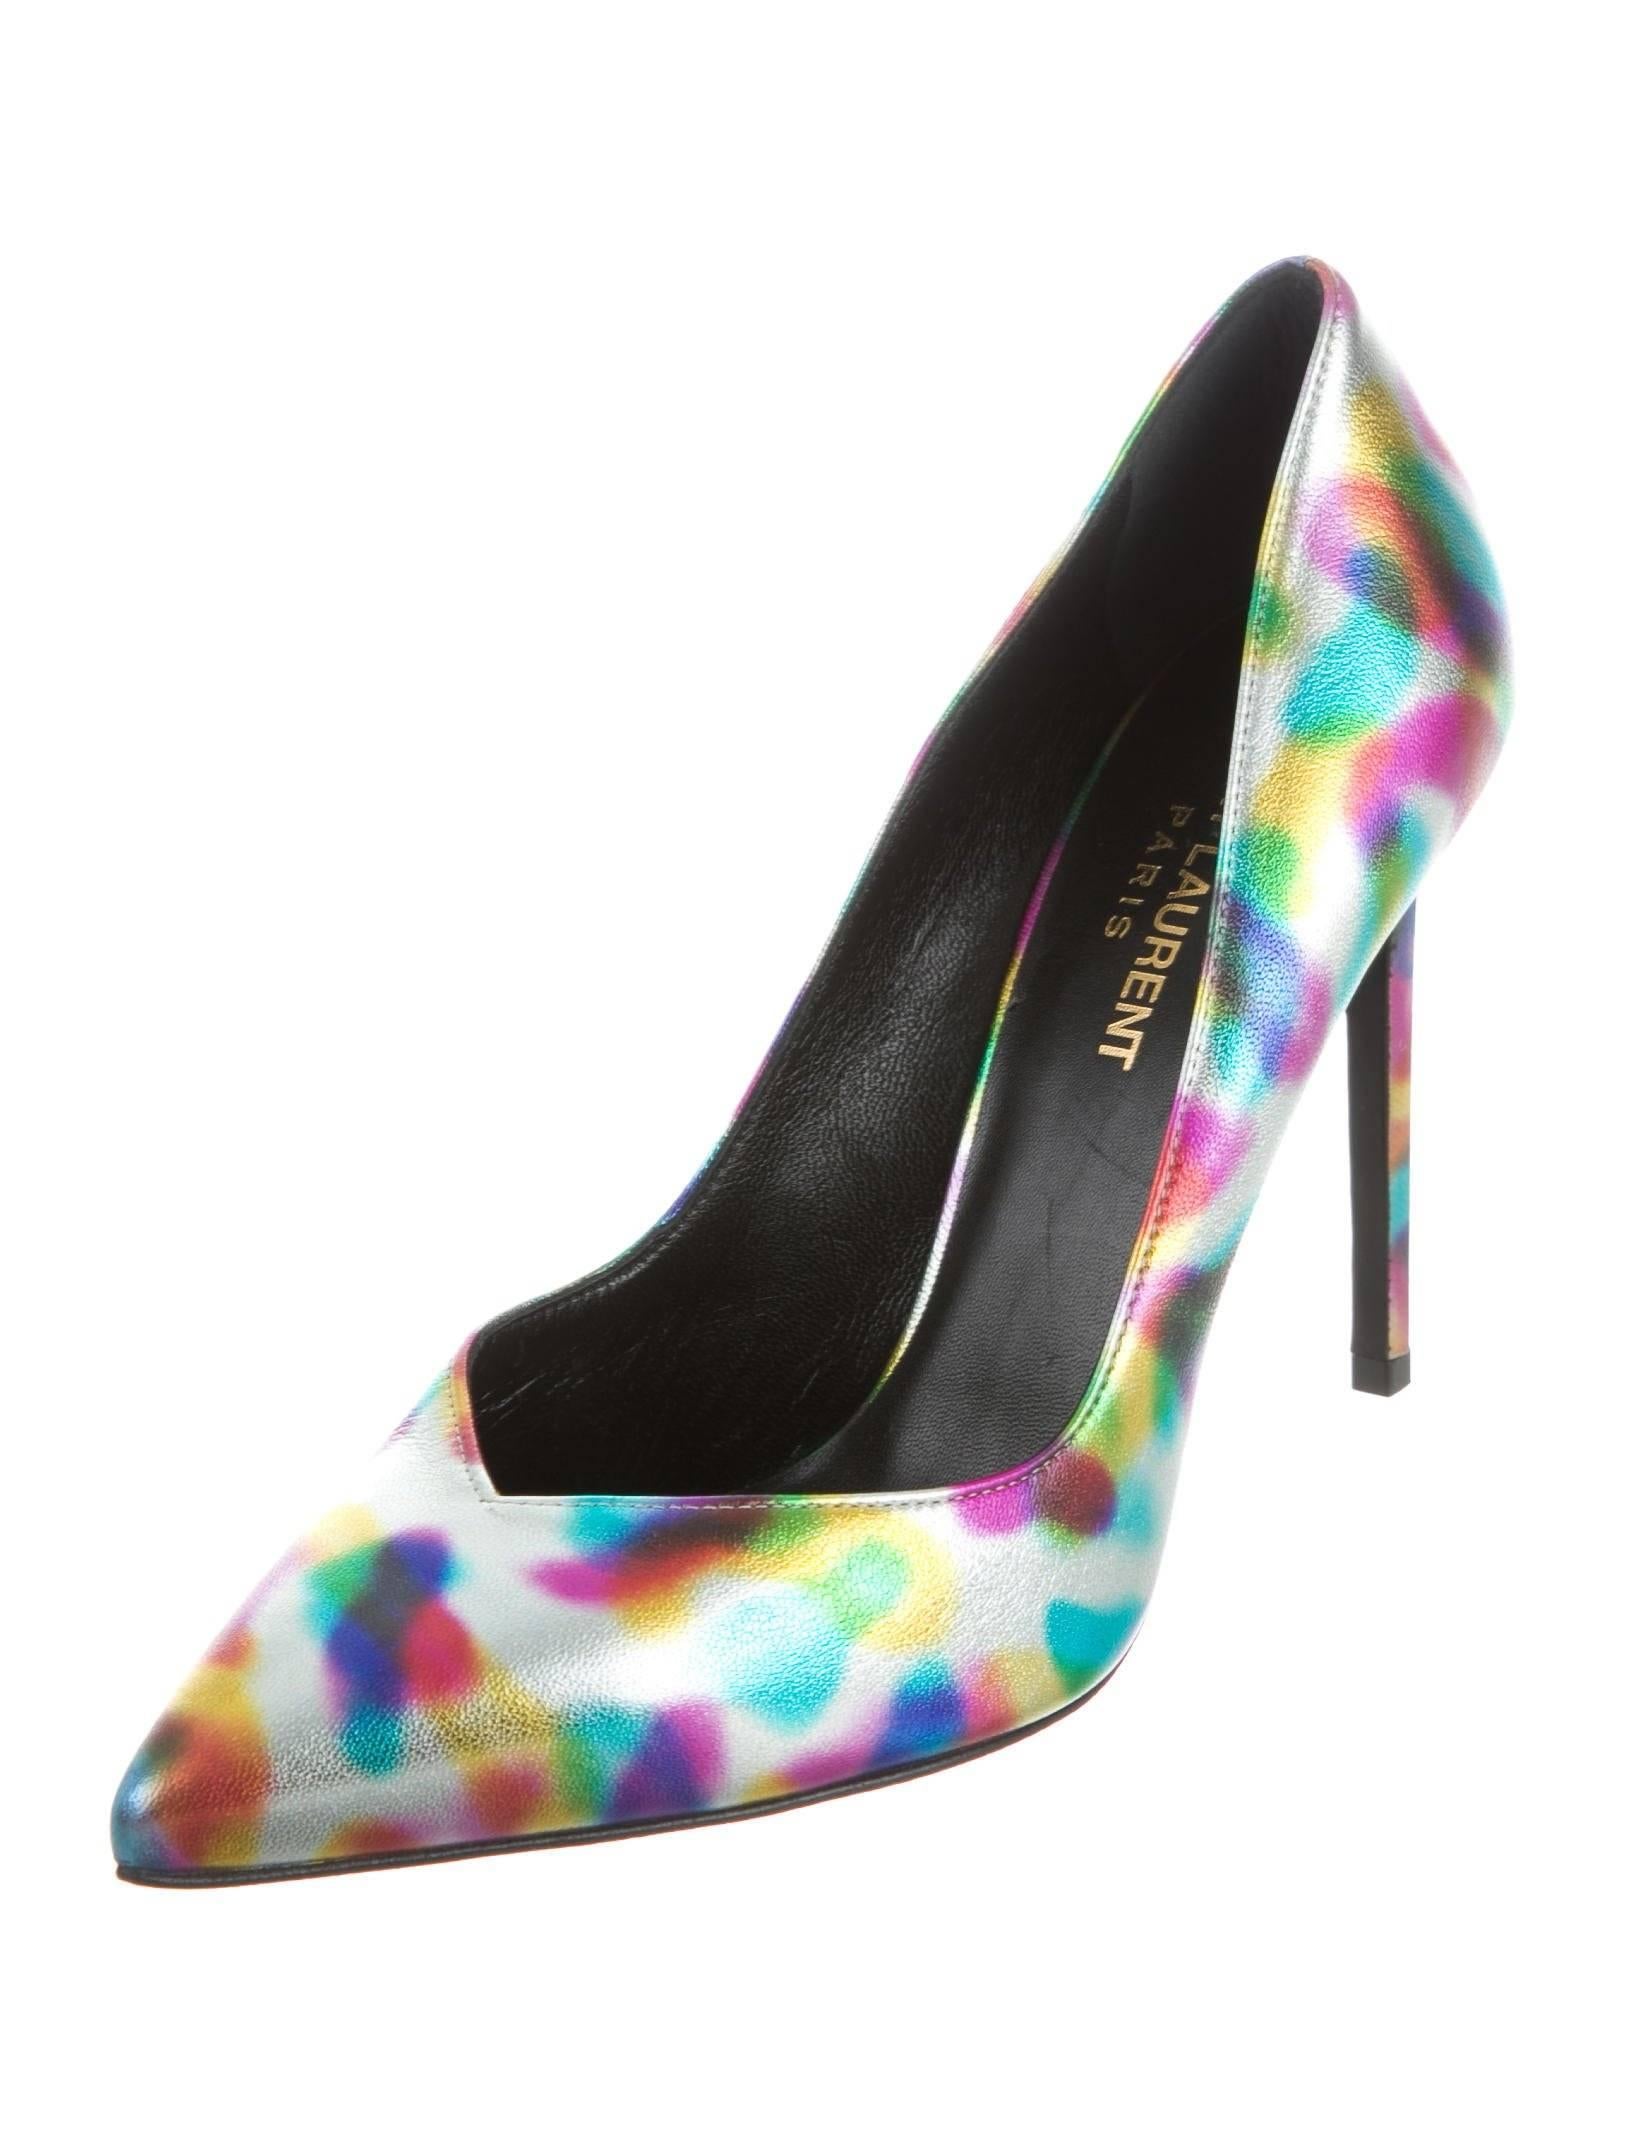 Gray Saint Laurent New Rainbow Leather Evening Heels Pumps Shoes in Box